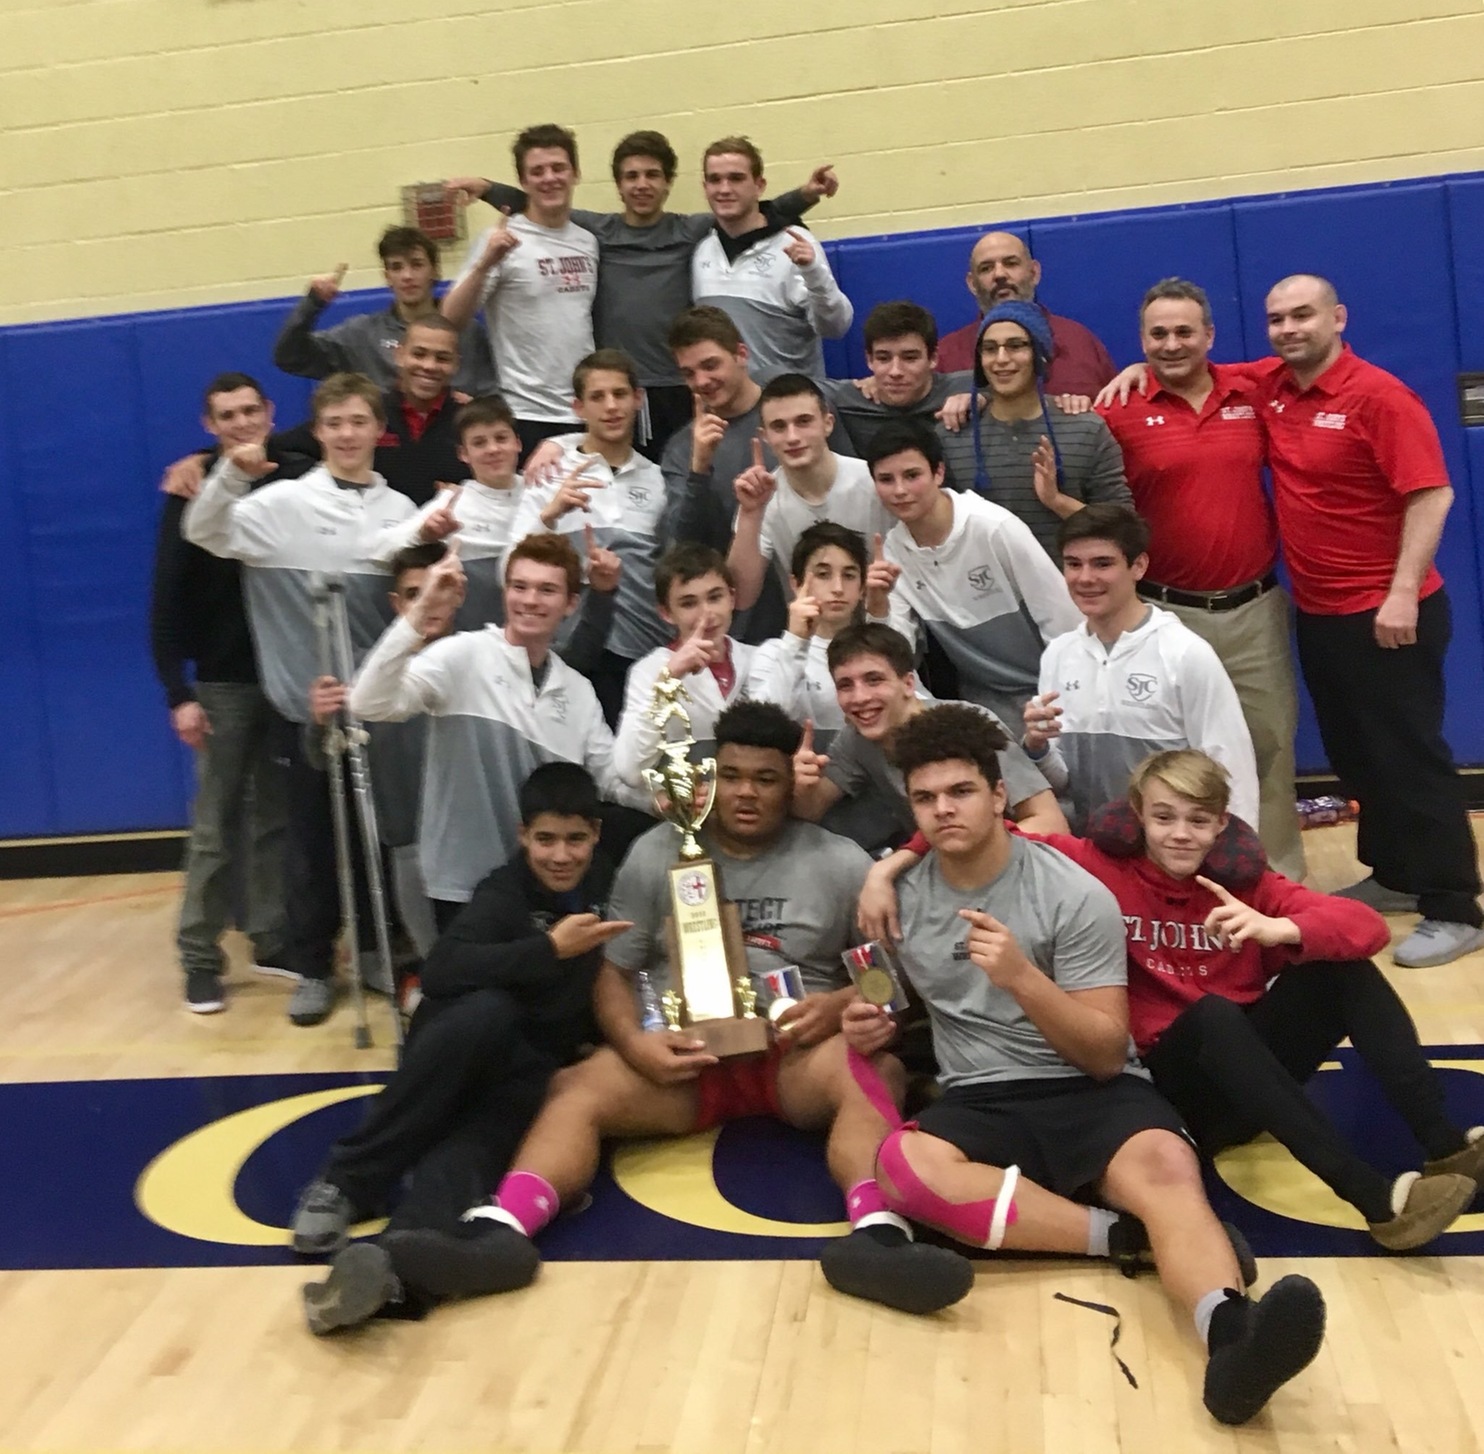 Things get a little chippy at WCAC wrestling meet as St. John’s wins team title